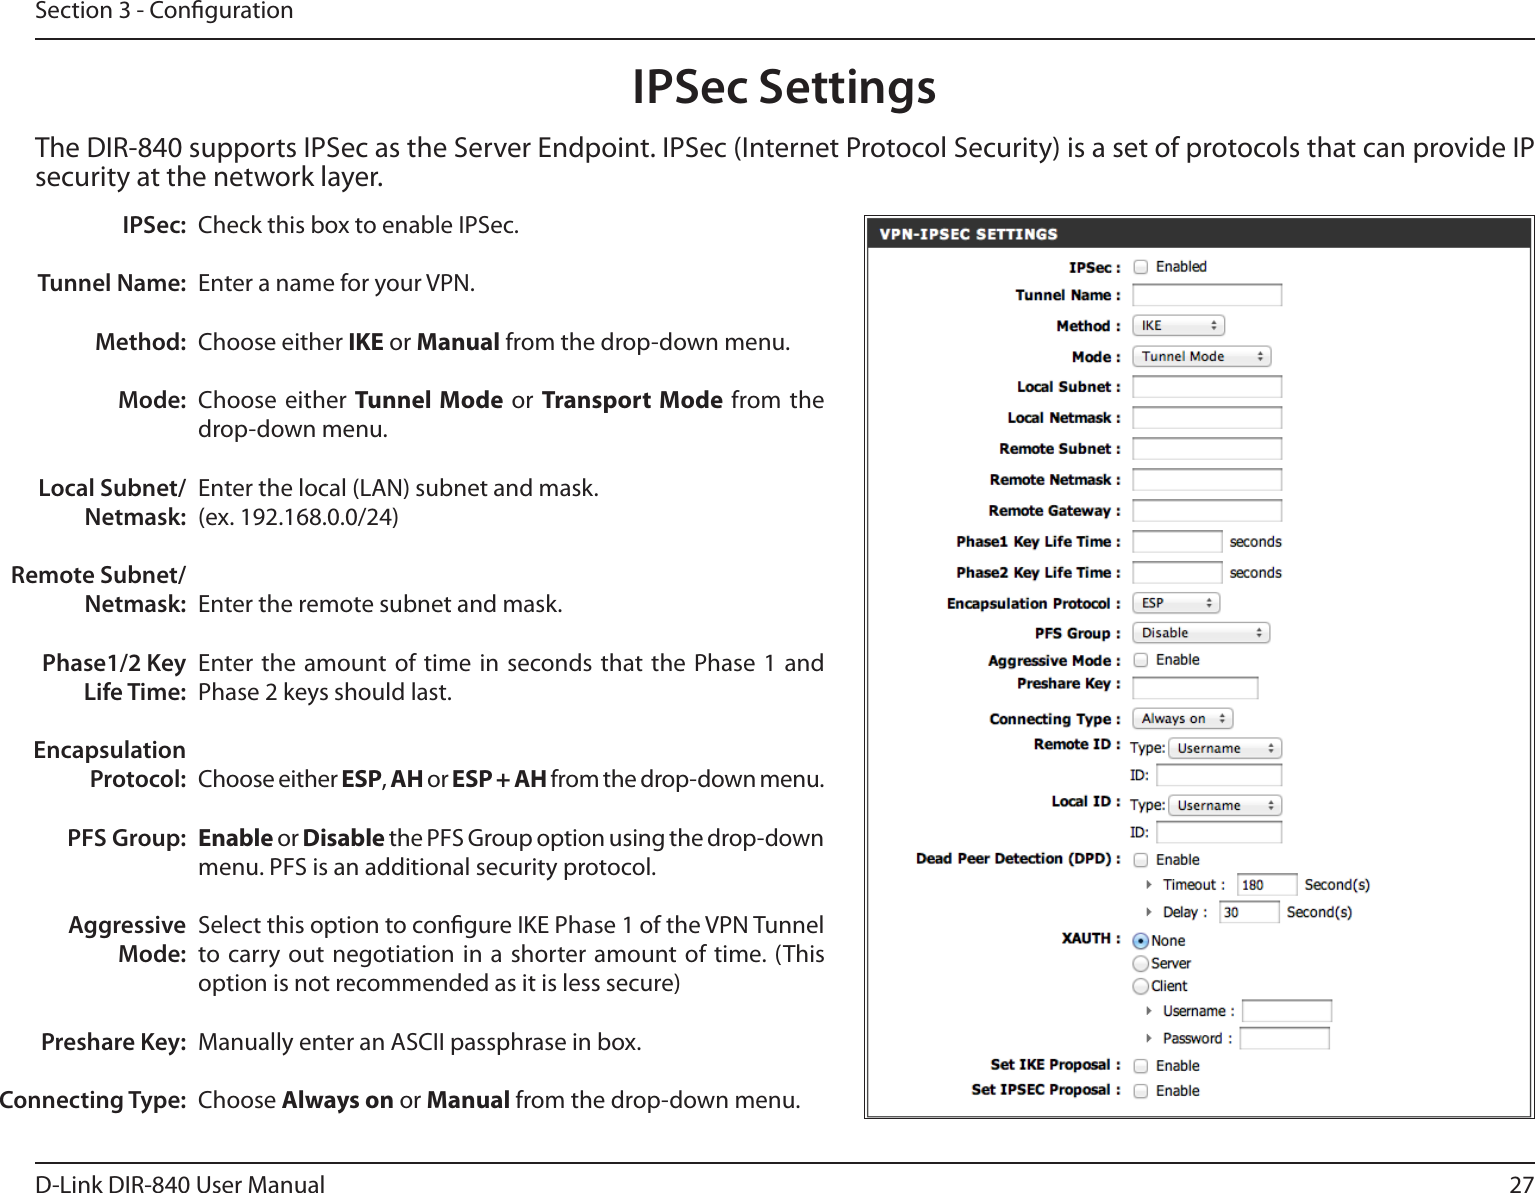 27D-Link DIR-840 User ManualSection 3 - CongurationCheck this box to enable IPSec.Enter a name for your VPN.Choose either IKE or Manual from the drop-down menu.Choose either  Tunnel  Mode or Transport Mode  from  the drop-down menu.Enter the local (LAN) subnet and mask.(ex. 192.168.0.0/24)Enter the remote subnet and mask.Enter the  amount  of time in seconds that  the Phase 1  and Phase 2 keys should last.Choose either ESP, AH or ESP + AH from the drop-down menu.Enable or Disable the PFS Group option using the drop-down menu. PFS is an additional security protocol.Select this option to congure IKE Phase 1 of the VPN Tunnel to carry out negotiation in a shorter amount of  time. (This option is not recommended as it is less secure)Manually enter an ASCII passphrase in box.Choose Always on or Manual from the drop-down menu.IPSec:Tunnel Name:Method:Mode:Local Subnet/Netmask:Remote Subnet/Netmask:Phase1/2 Key Life Time:Encapsulation Protocol:PFS Group:Aggressive Mode:Preshare Key:Connecting Type:IPSec SettingsThe DIR-840 supports IPSec as the Server Endpoint. IPSec (Internet Protocol Security) is a set of protocols that can provide IP security at the network layer.